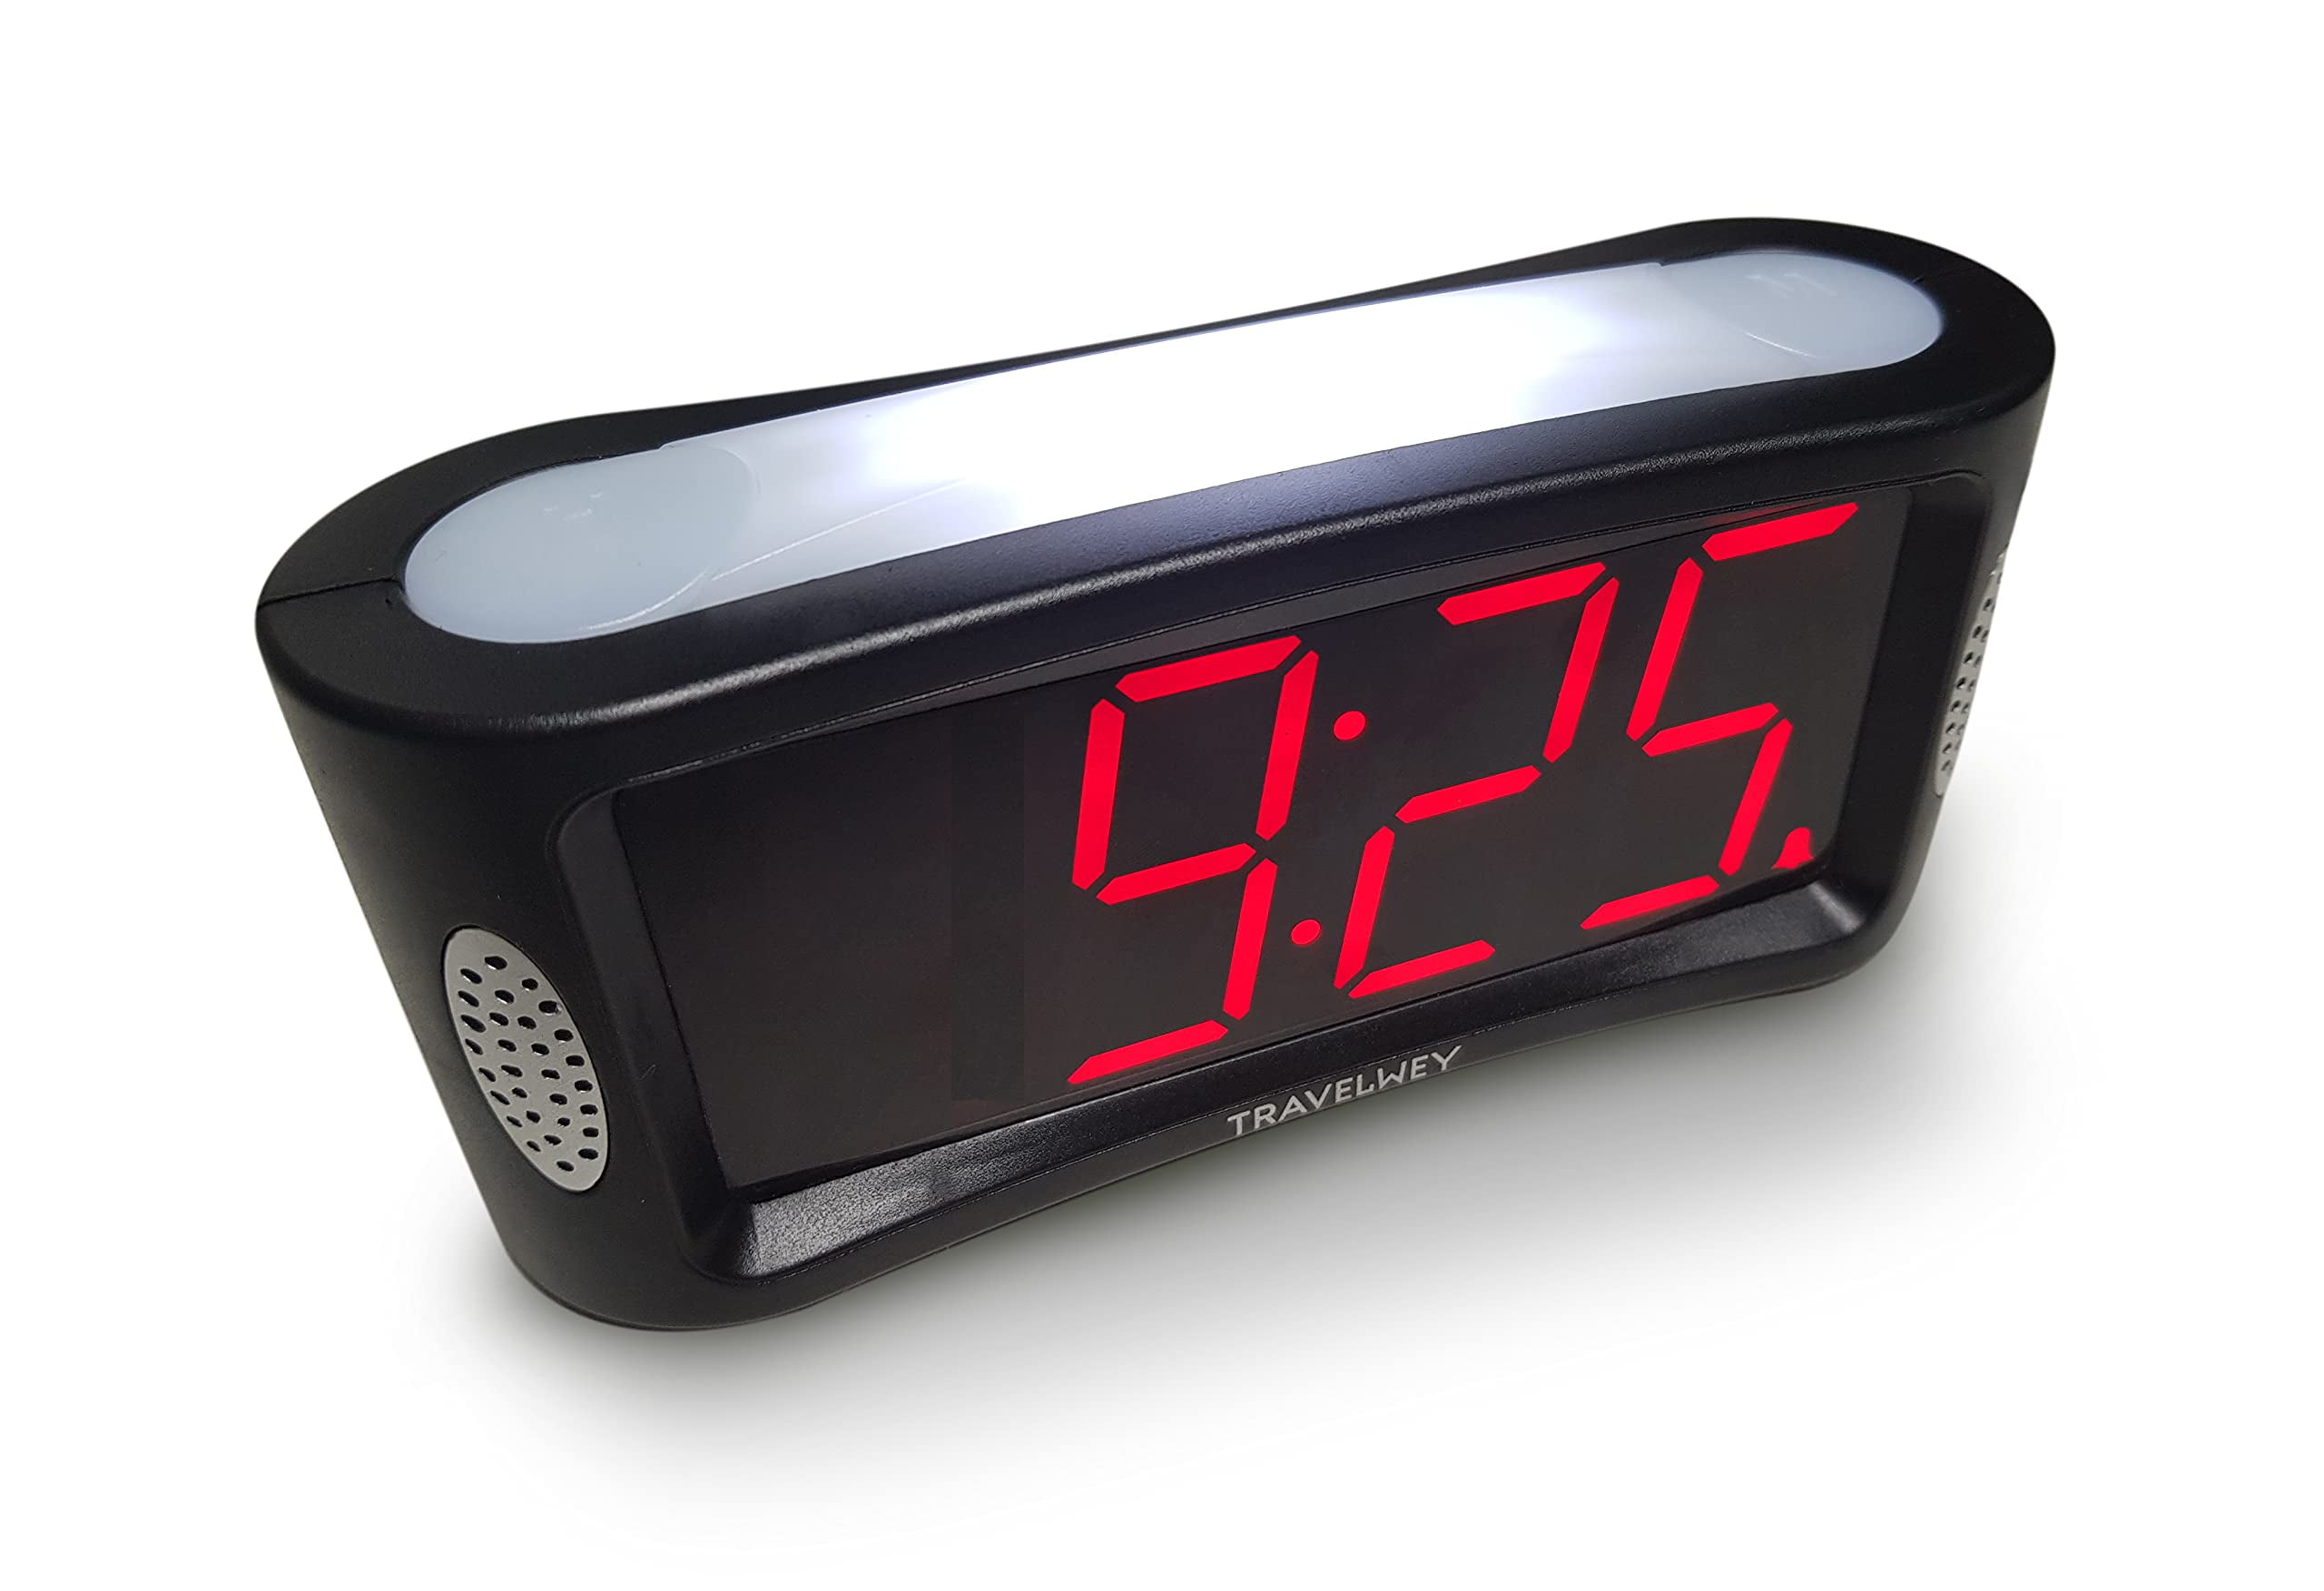 Eye Light Sound Activated Illuminated Holder With Clock For Glasses,Tissues 